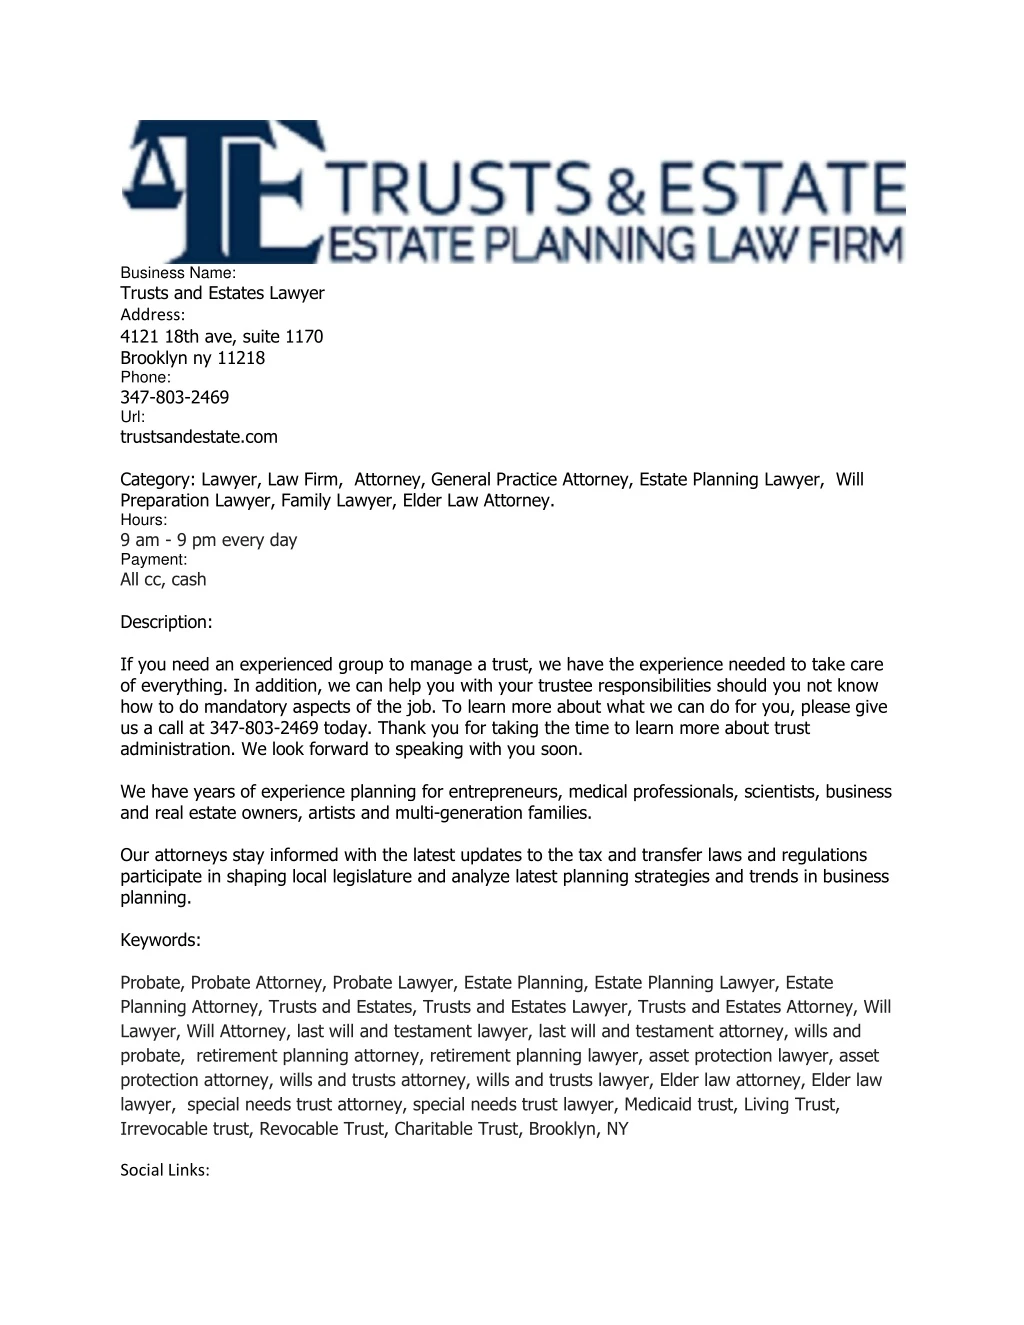 business name trusts and estates lawyer address